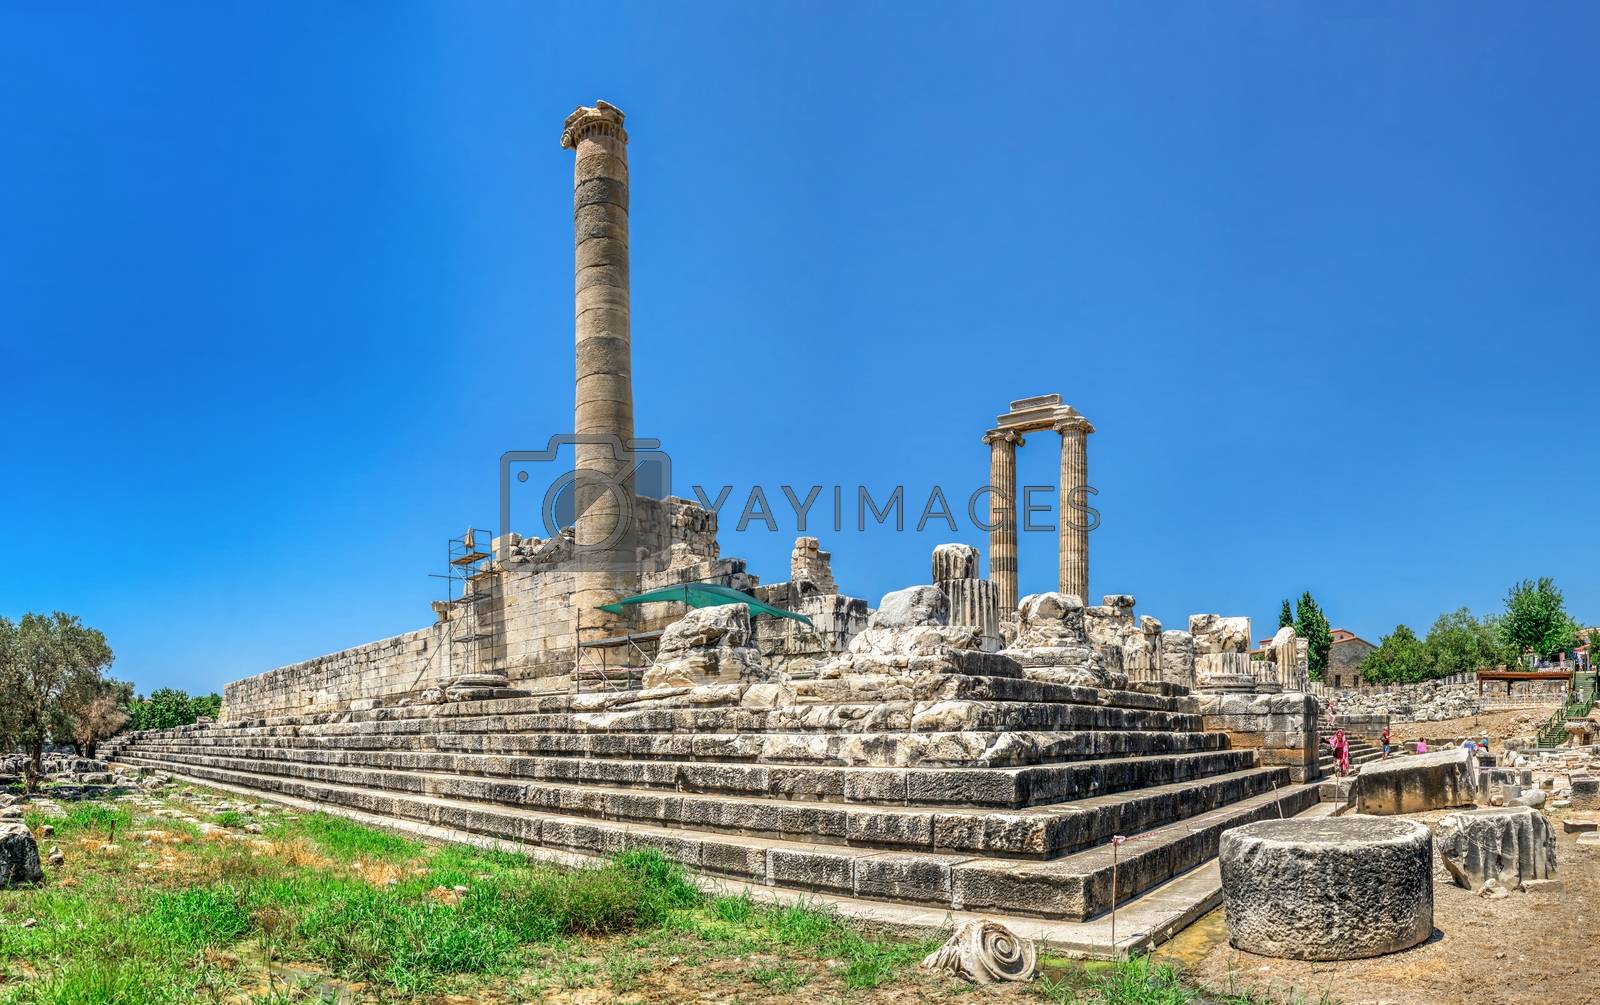 Royalty free image of The southern flank of the temple of Apollo at Didyma, Turkey by Multipedia